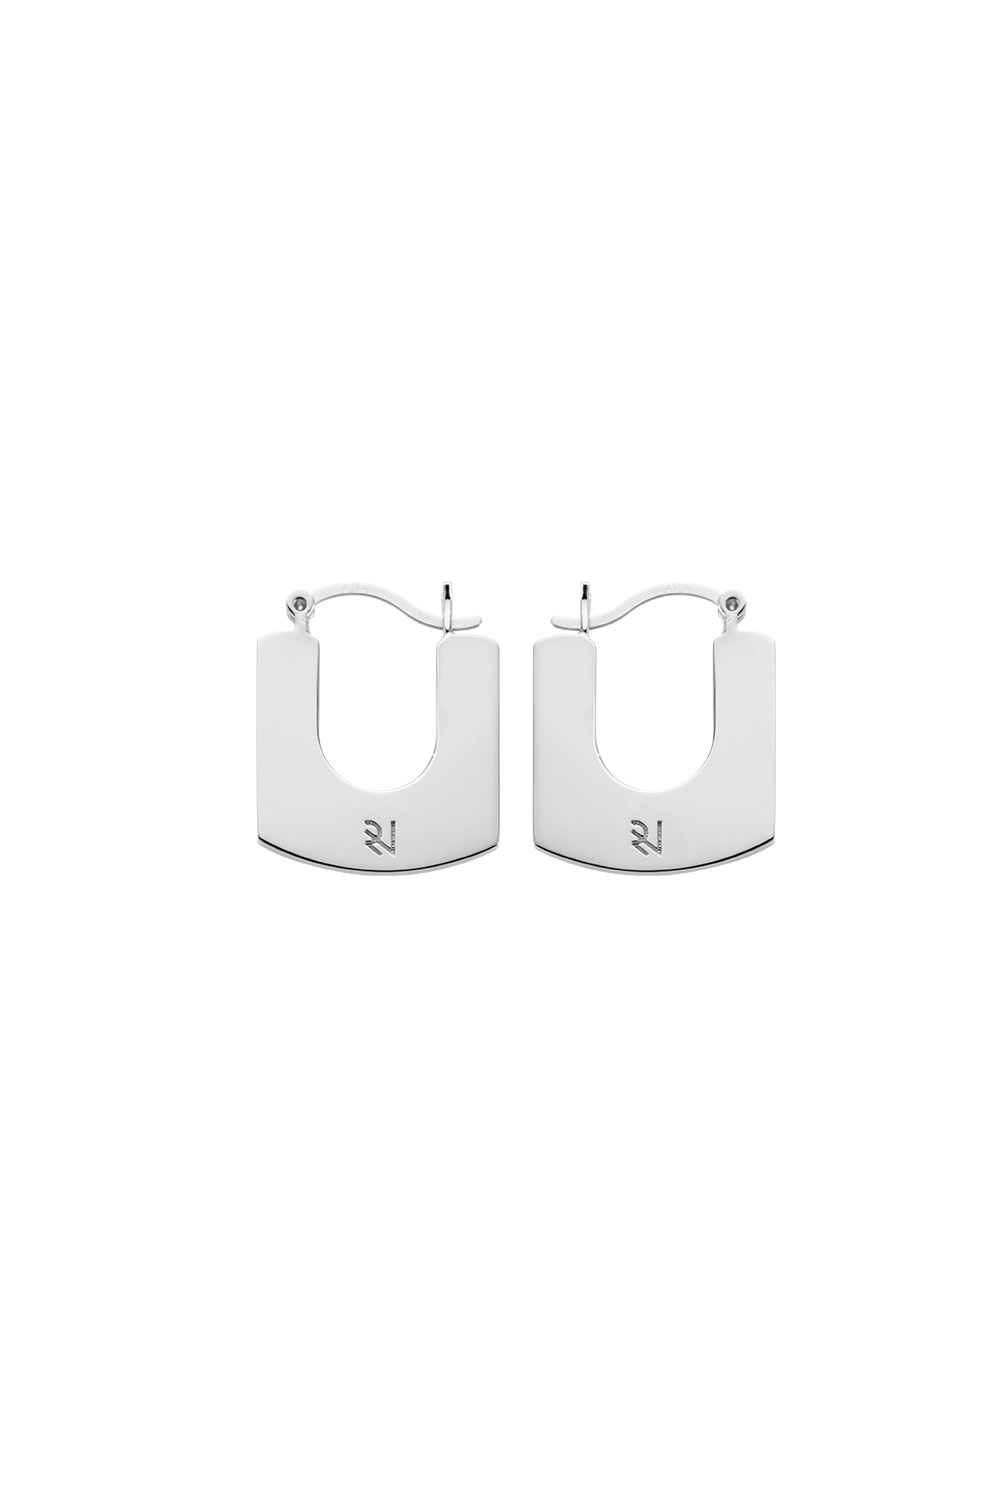 square-flat french lock earrings